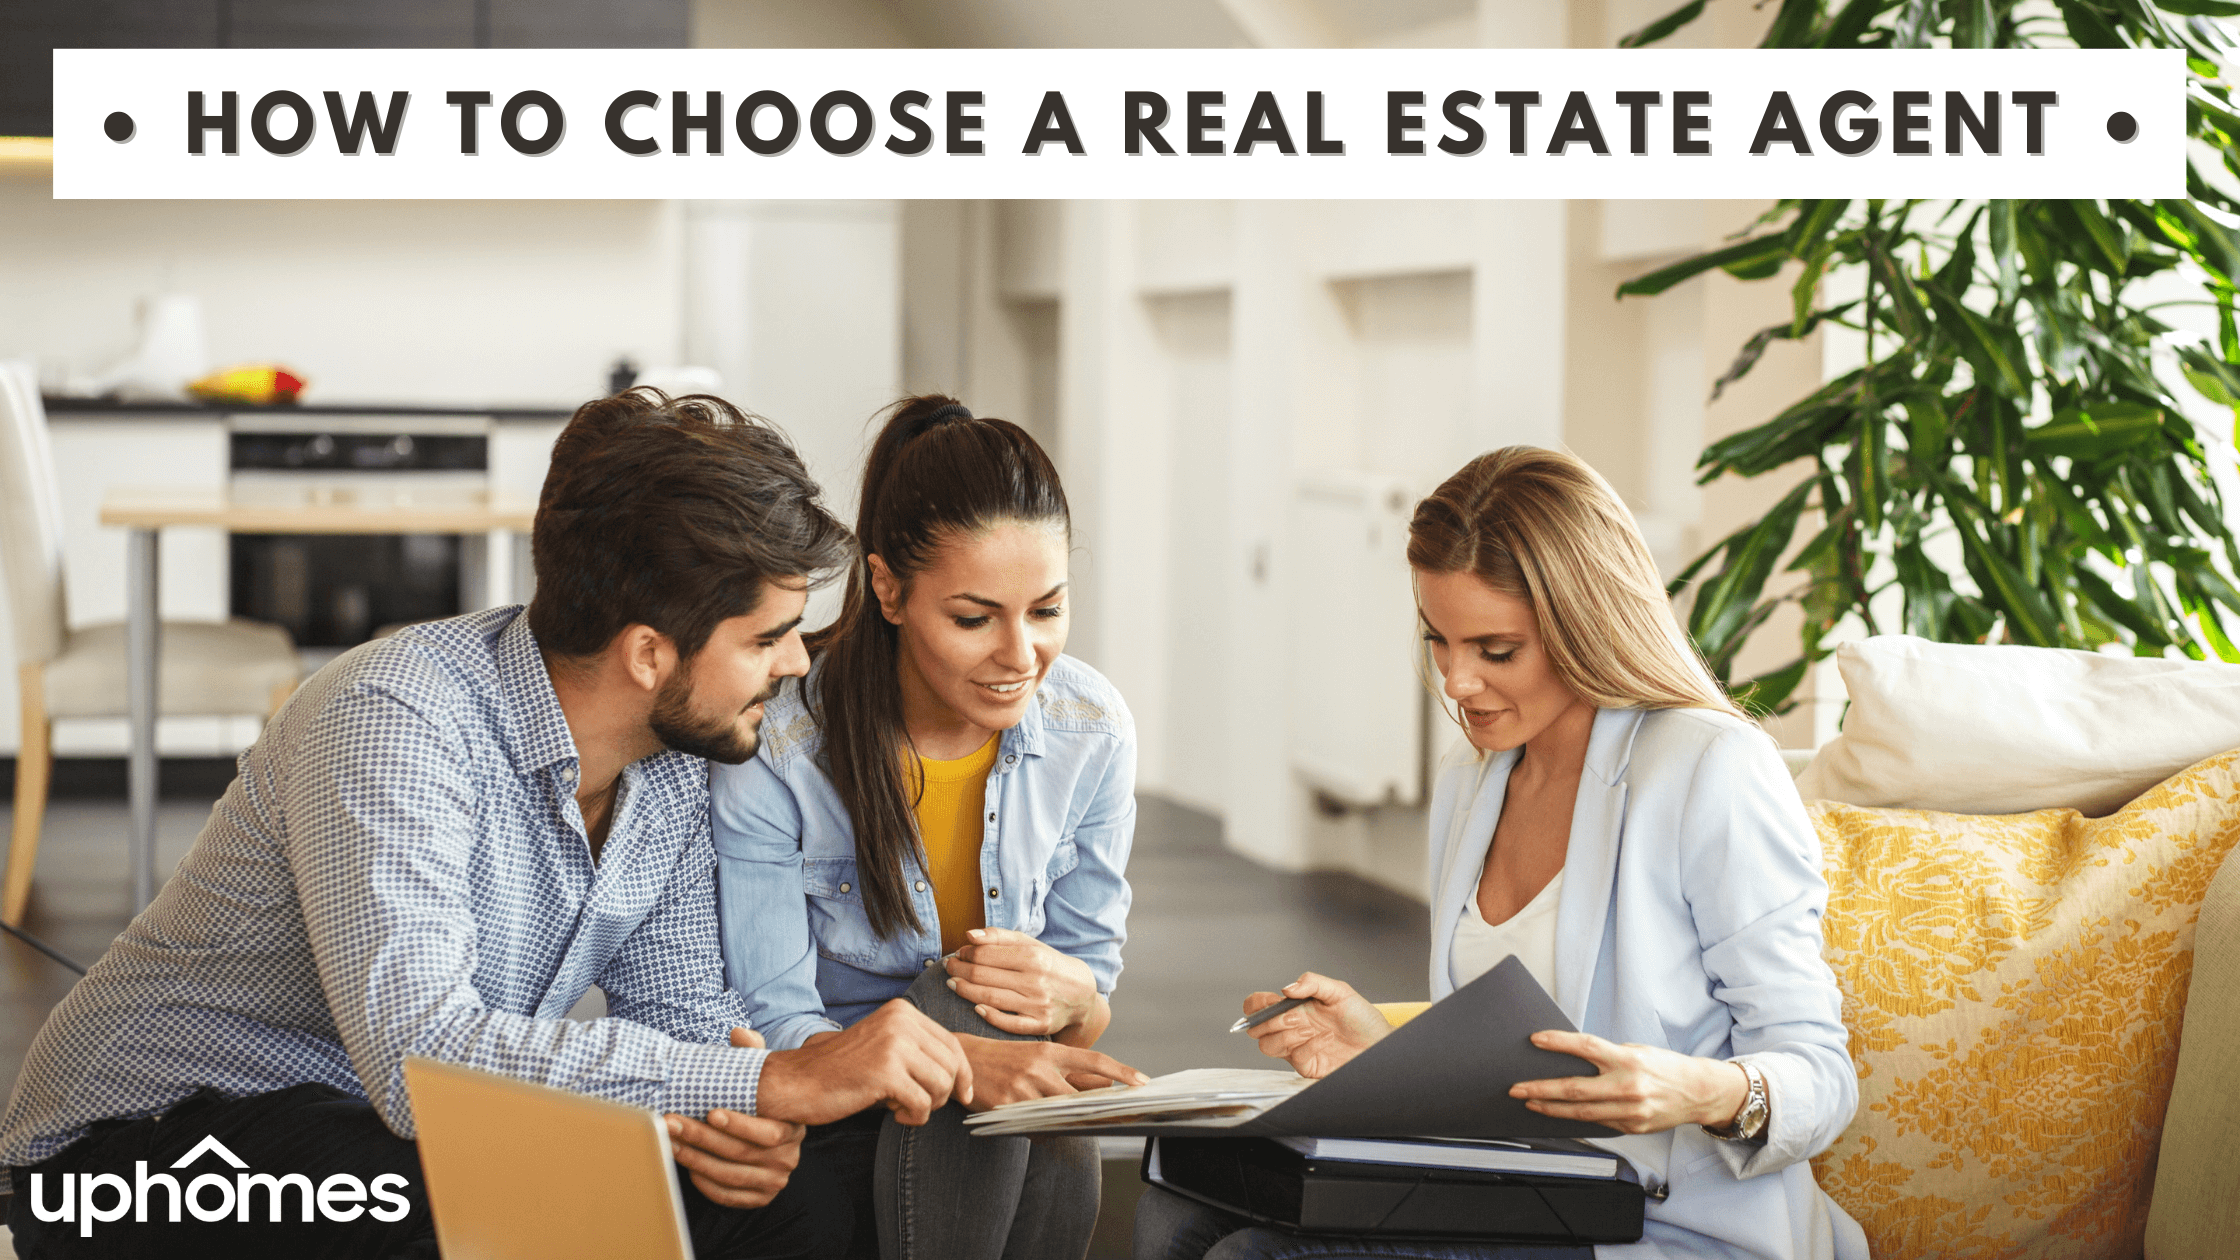 How to Choose a Real Estate Agent: 5 Key Takeaways